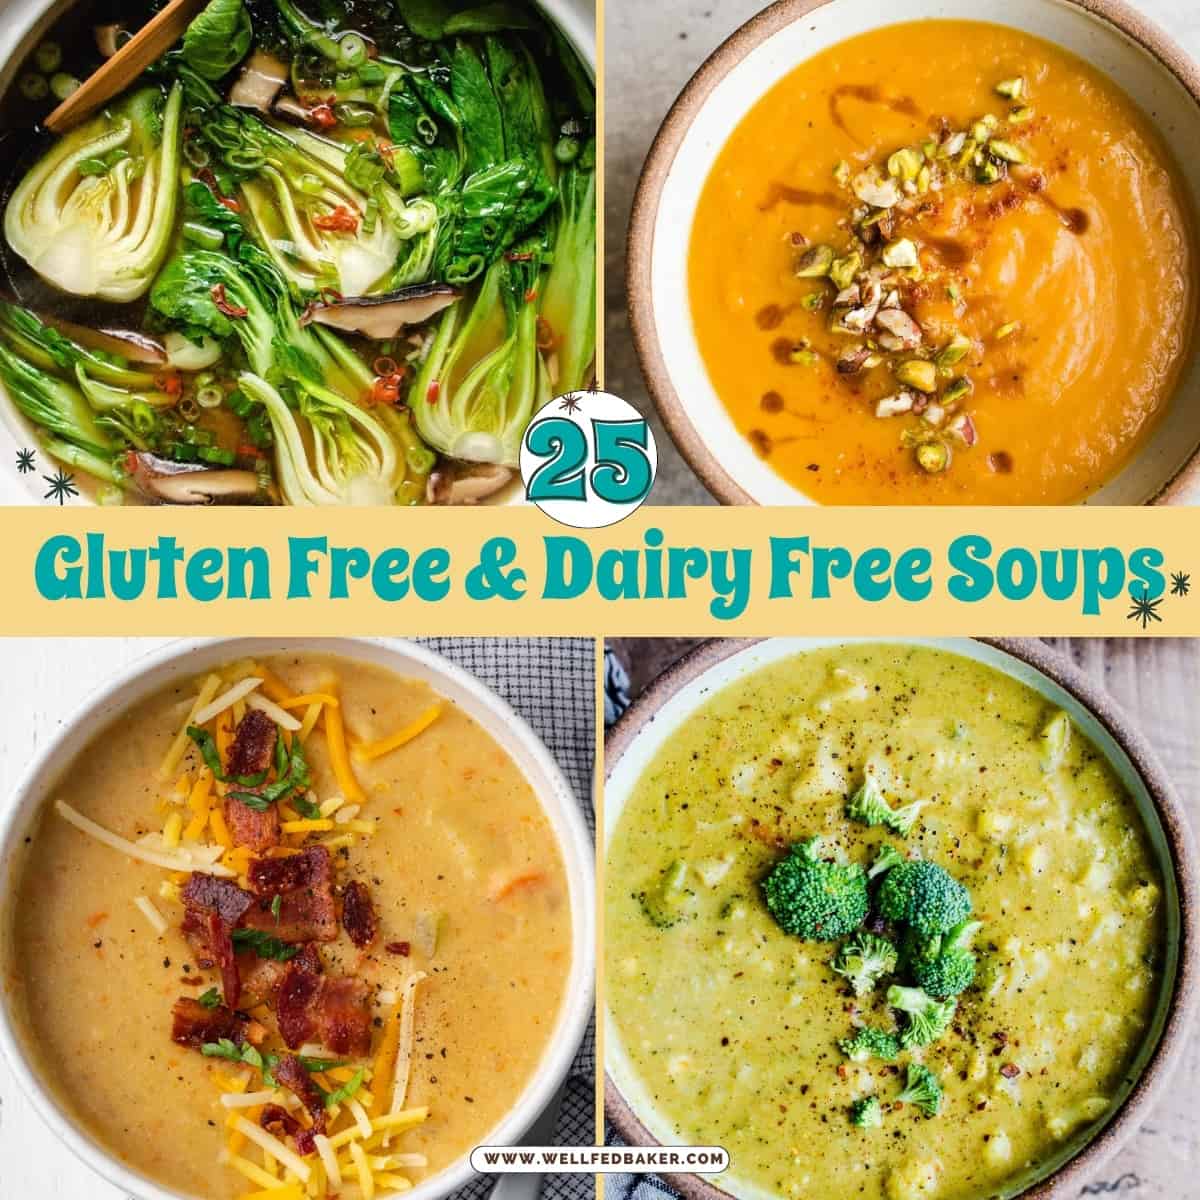 Pin for 25 gluten free & dairy free soup recipes.